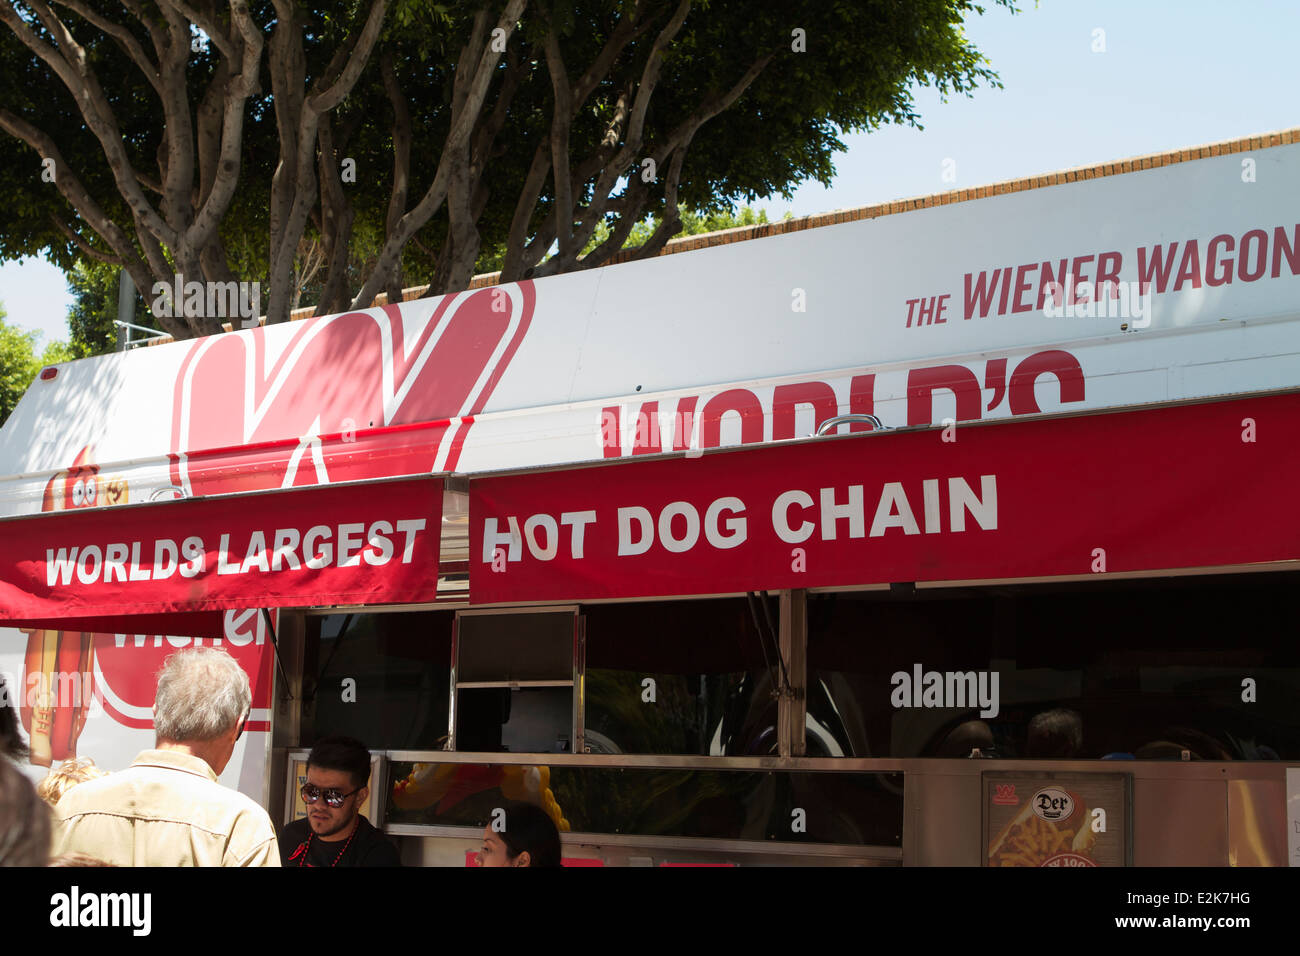 The wiener wagon hot dogs from the Wienerschnitzel the wolds largest hot dog chain at a street fair in Tustin California . Stock Photo